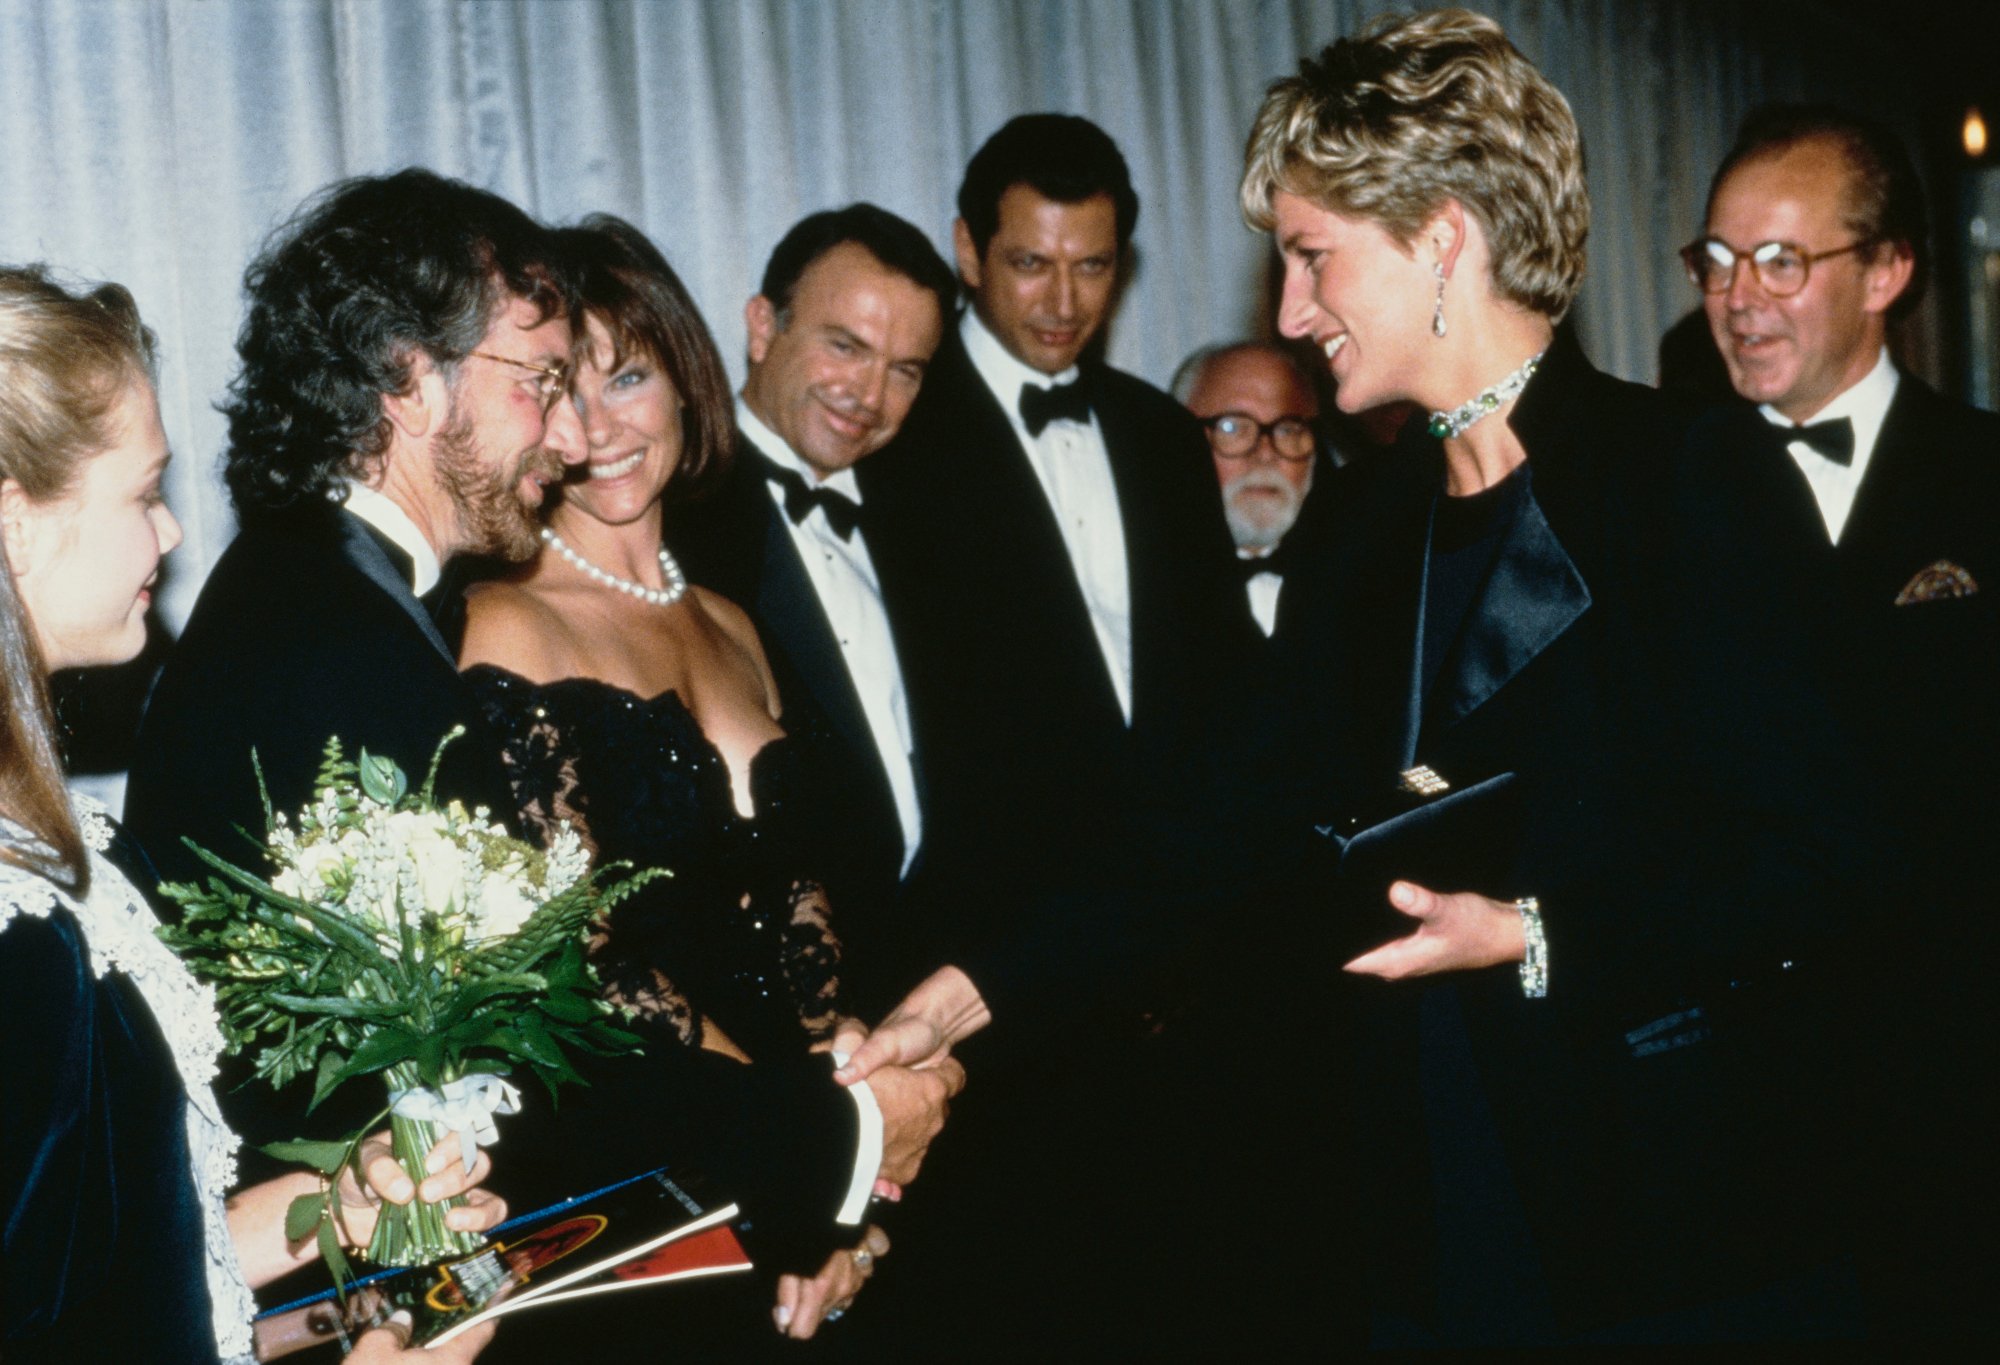 Princess Diana, Ariana Richards, director Spielberg and his wife Kate Capshaw, and stars Sam Neill, Jeff Goldblum and Richard Attenborough at 'Jurassic Park' premiere smiling in formal attire and shaking hands, while the film cast and crew shake hands with Diana.